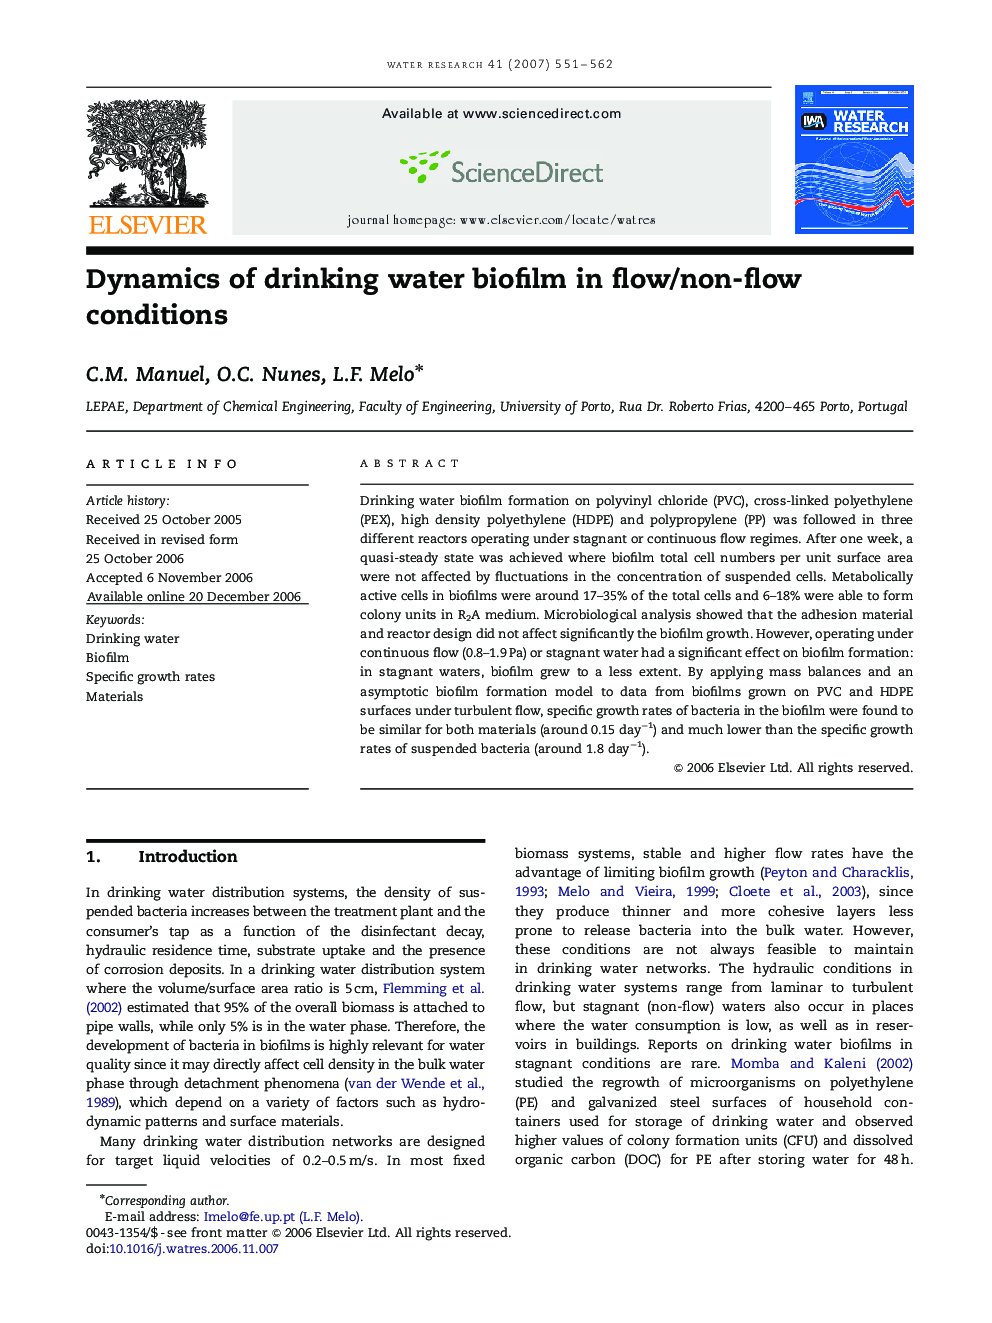 Dynamics of drinking water biofilm in flow/non-flow conditions